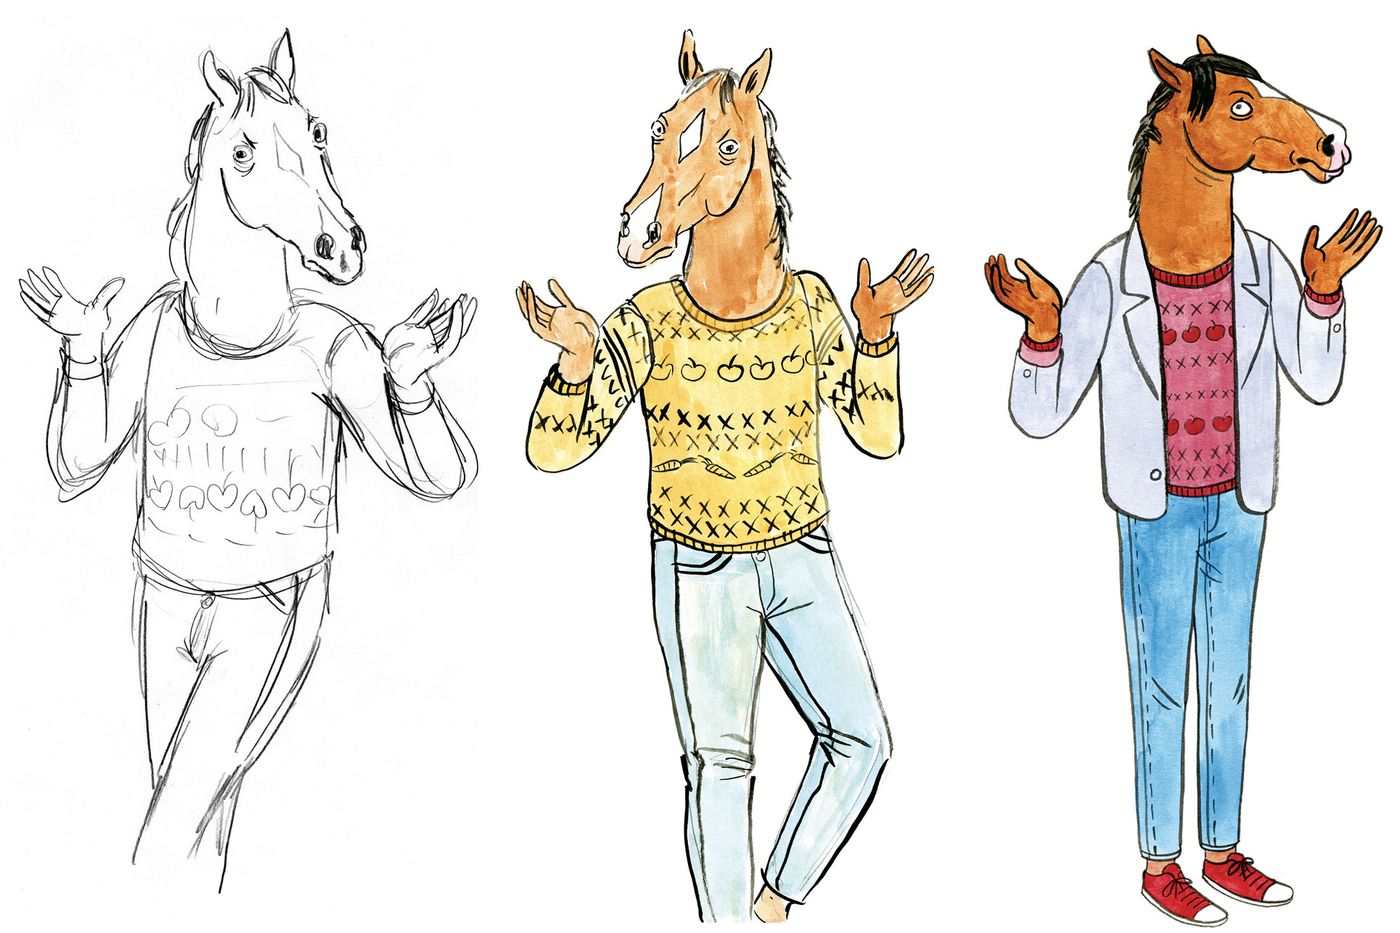 In season 2, can BoJack Horseman truly become a horse of a different color?